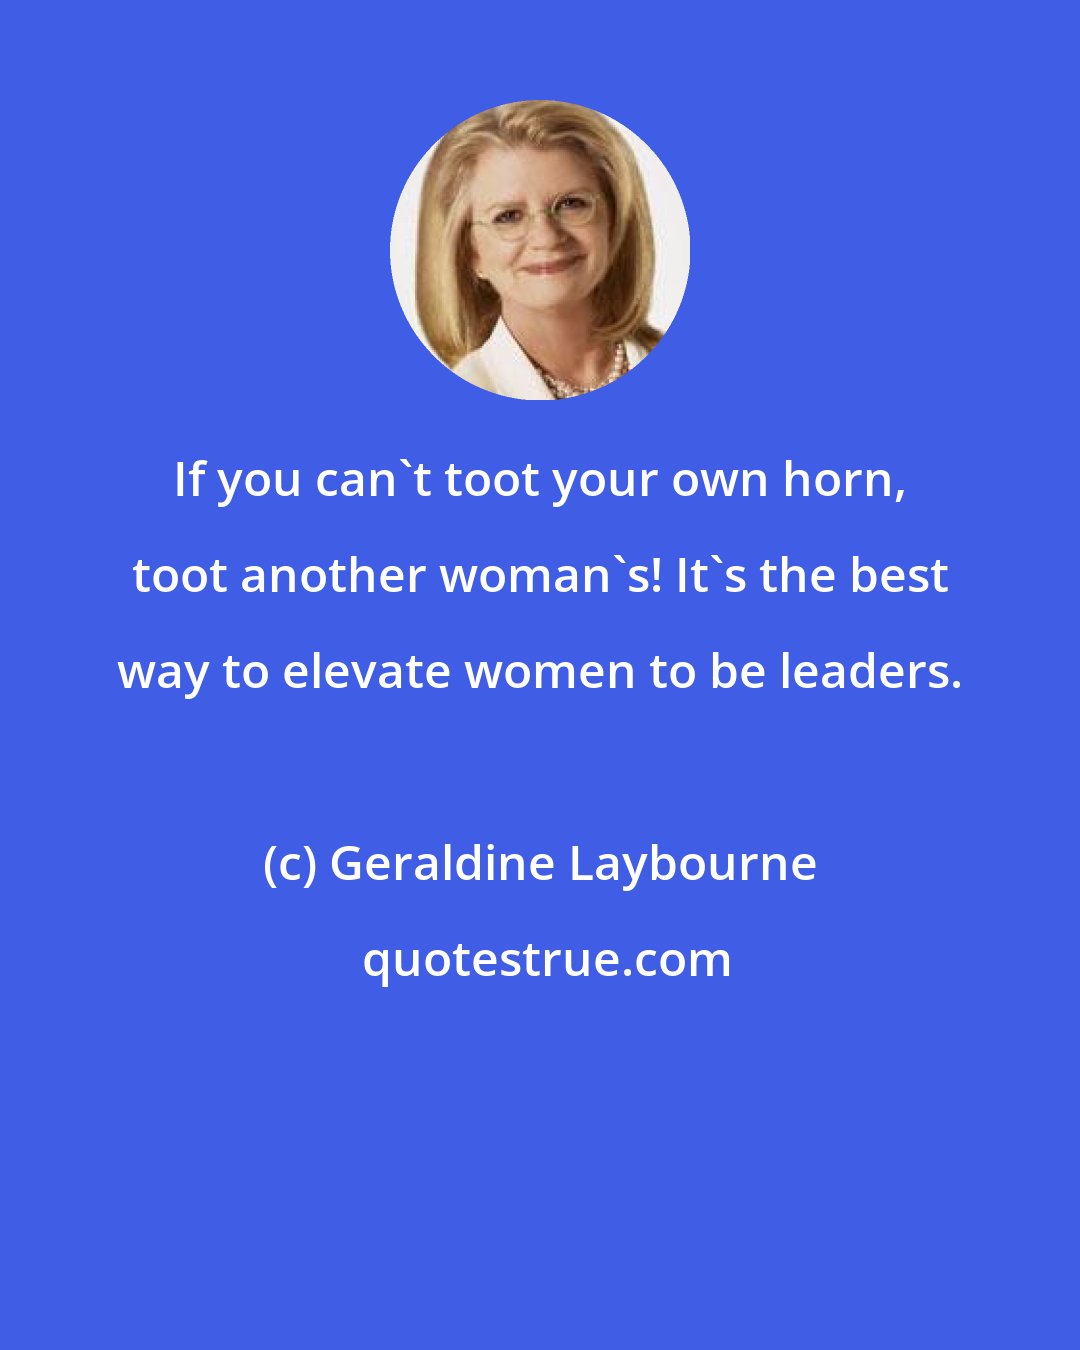 Geraldine Laybourne: If you can't toot your own horn, toot another woman's! It's the best way to elevate women to be leaders.